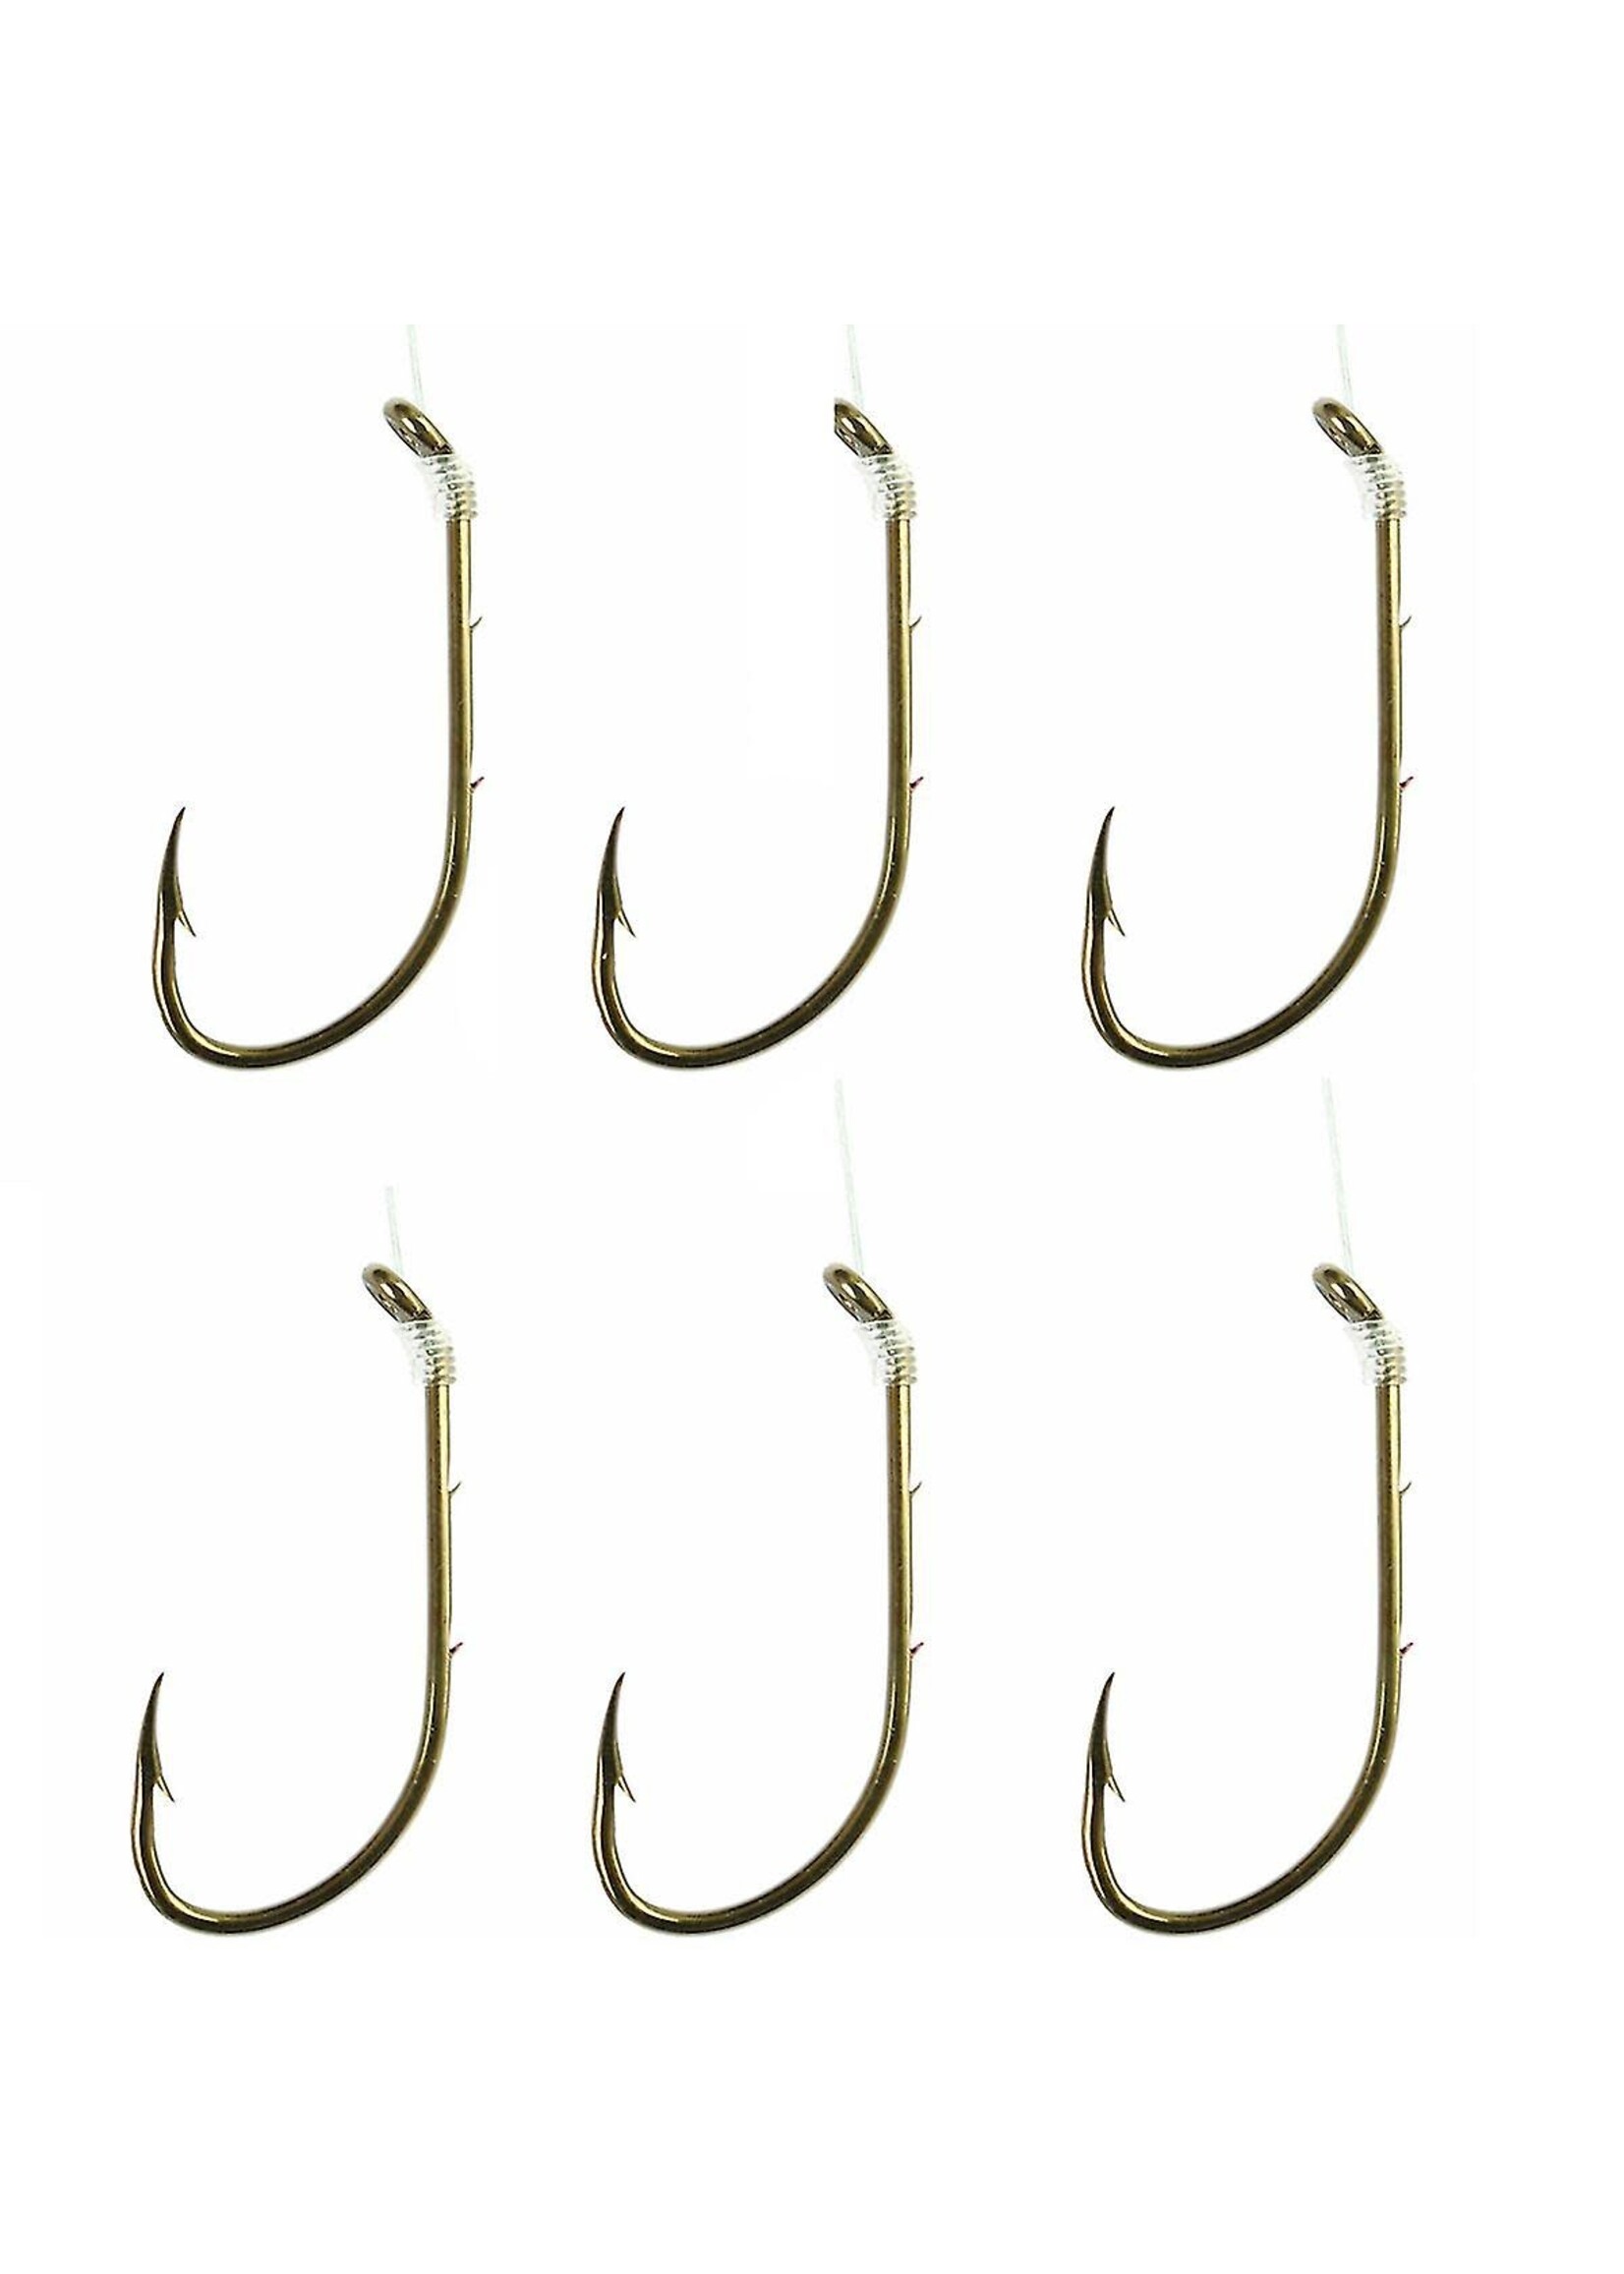 Eagle Claw EAGLE CLAW 13010-004 LAKER SNELLED HOOKS Sz1 BAITHOLDER BRONZE  6Pk - Cheap Seats Sports Excellence